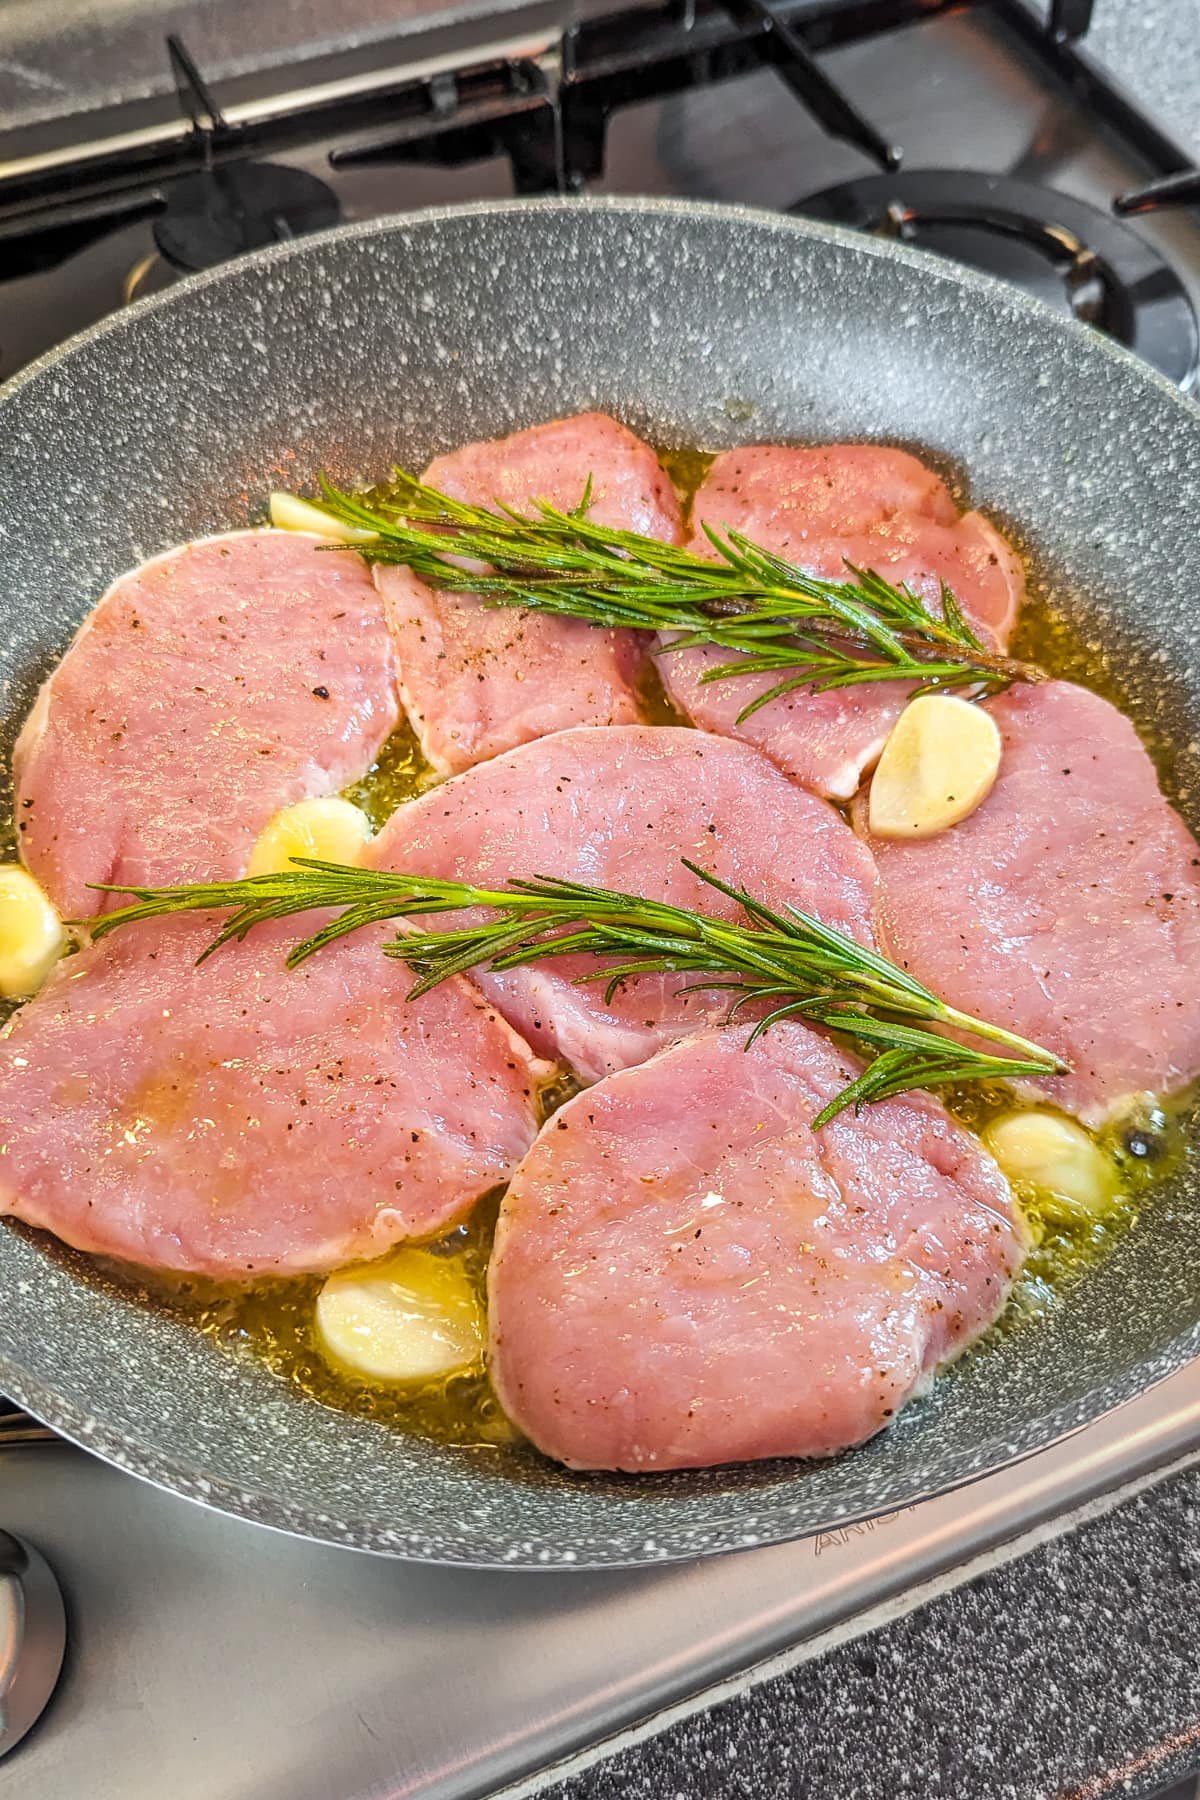 Frying pork chops in flavored melted butter with garlic and rosemary brunches.